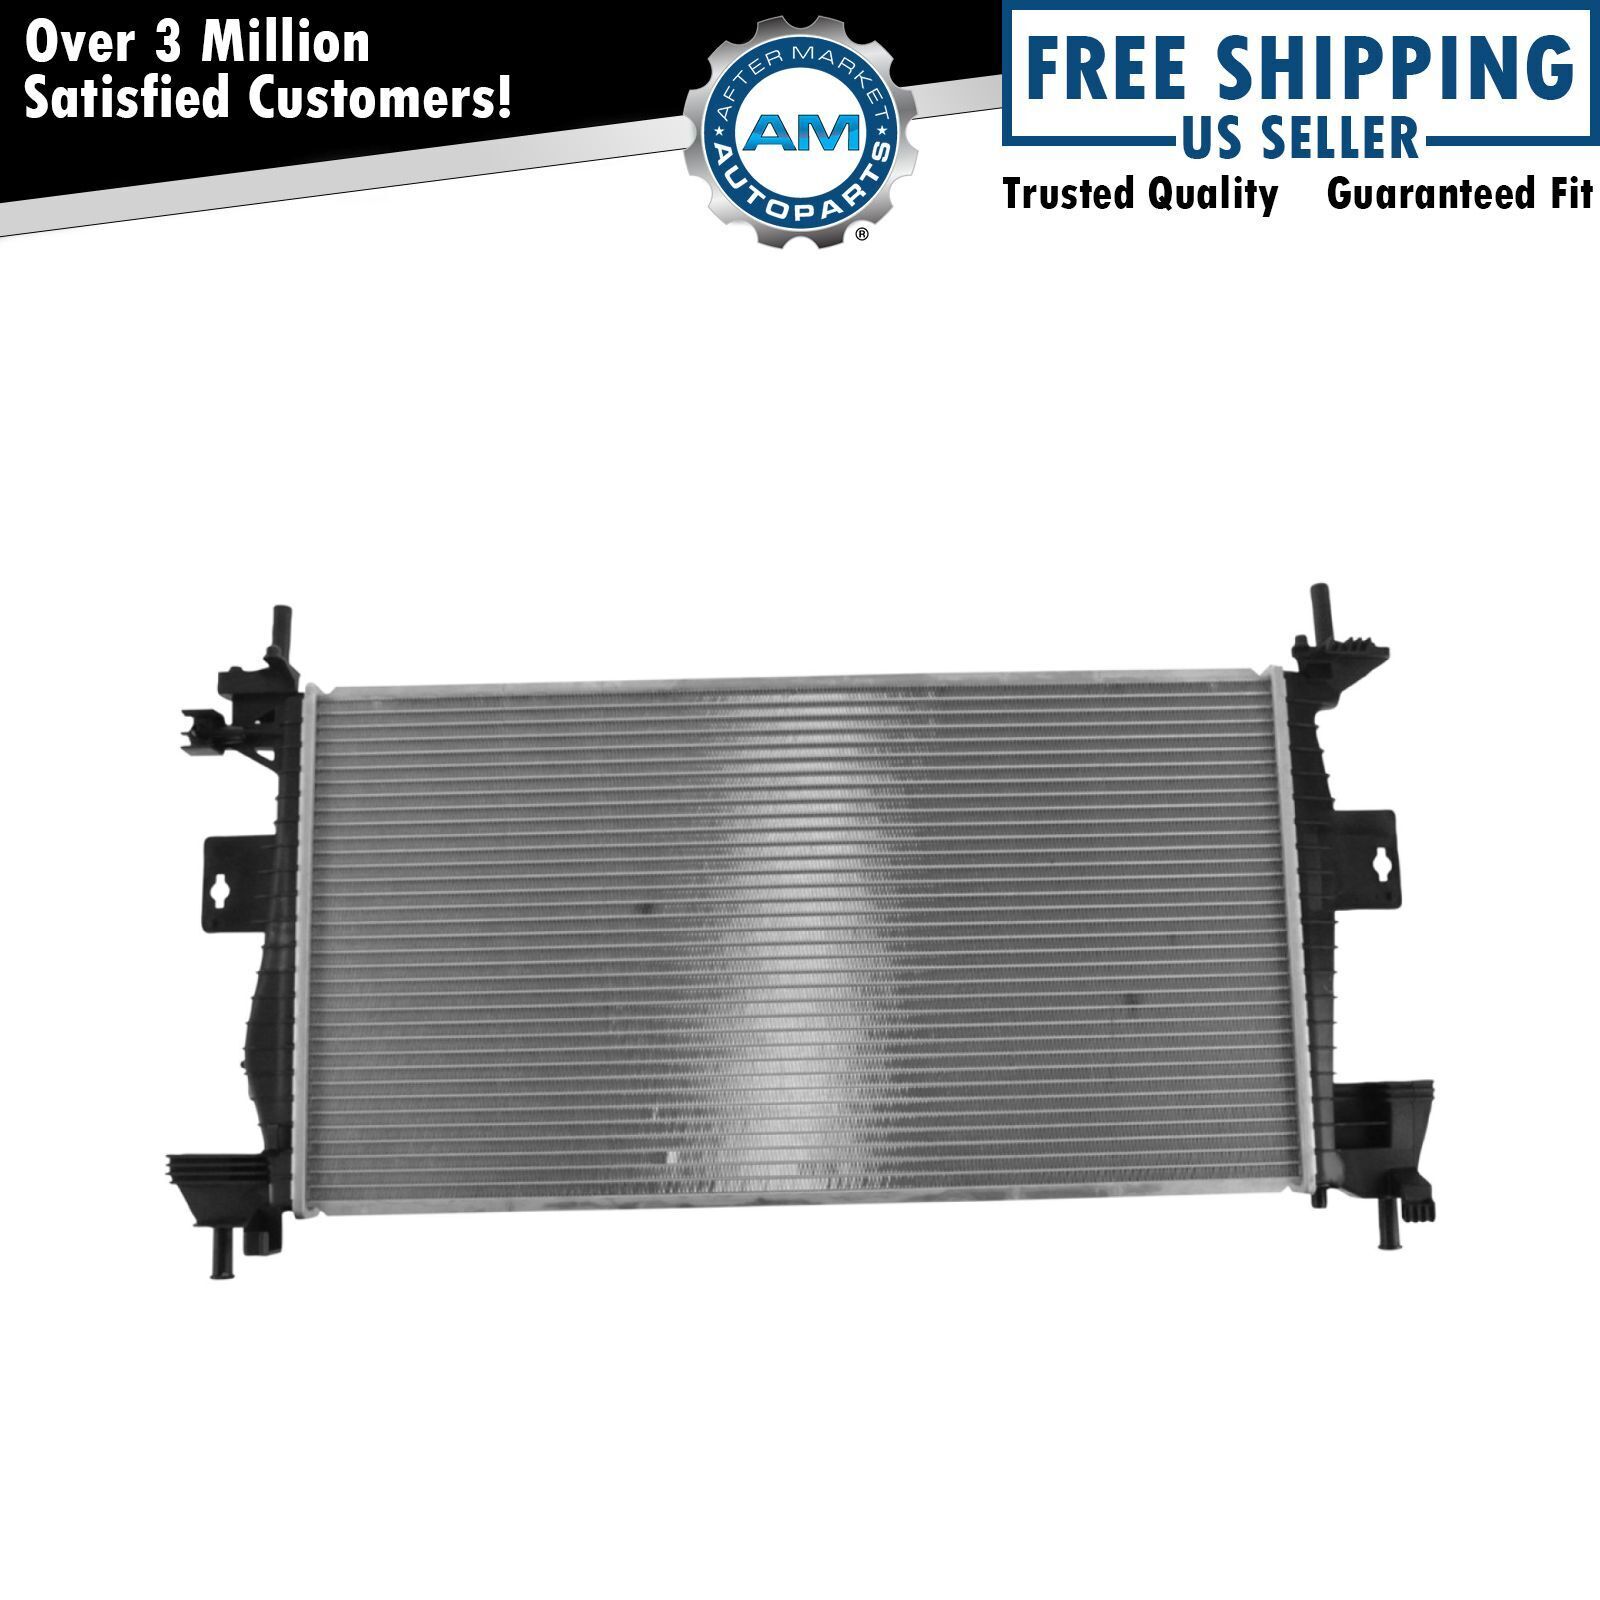 Radiator Assembly For 12-18 Ford Focus CU13219 FO3010301